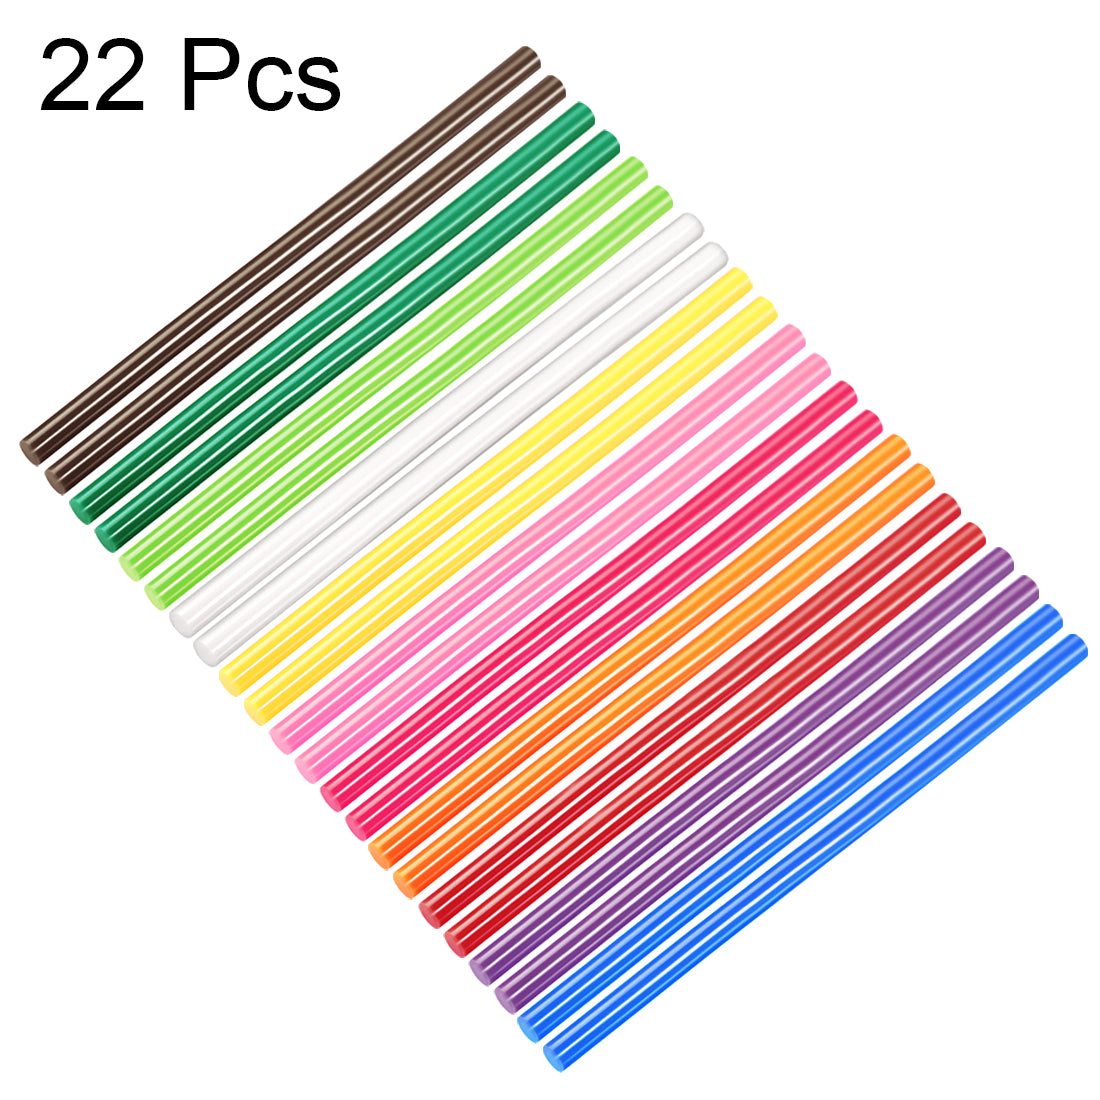 uxcell Uxcell Colorful Hot Melt Glue Gun Sticks, 250mm Long x 11mm Diameter,for Most Glue Guns, Perfect for DIY Craft Projects and Sealing,22pcs